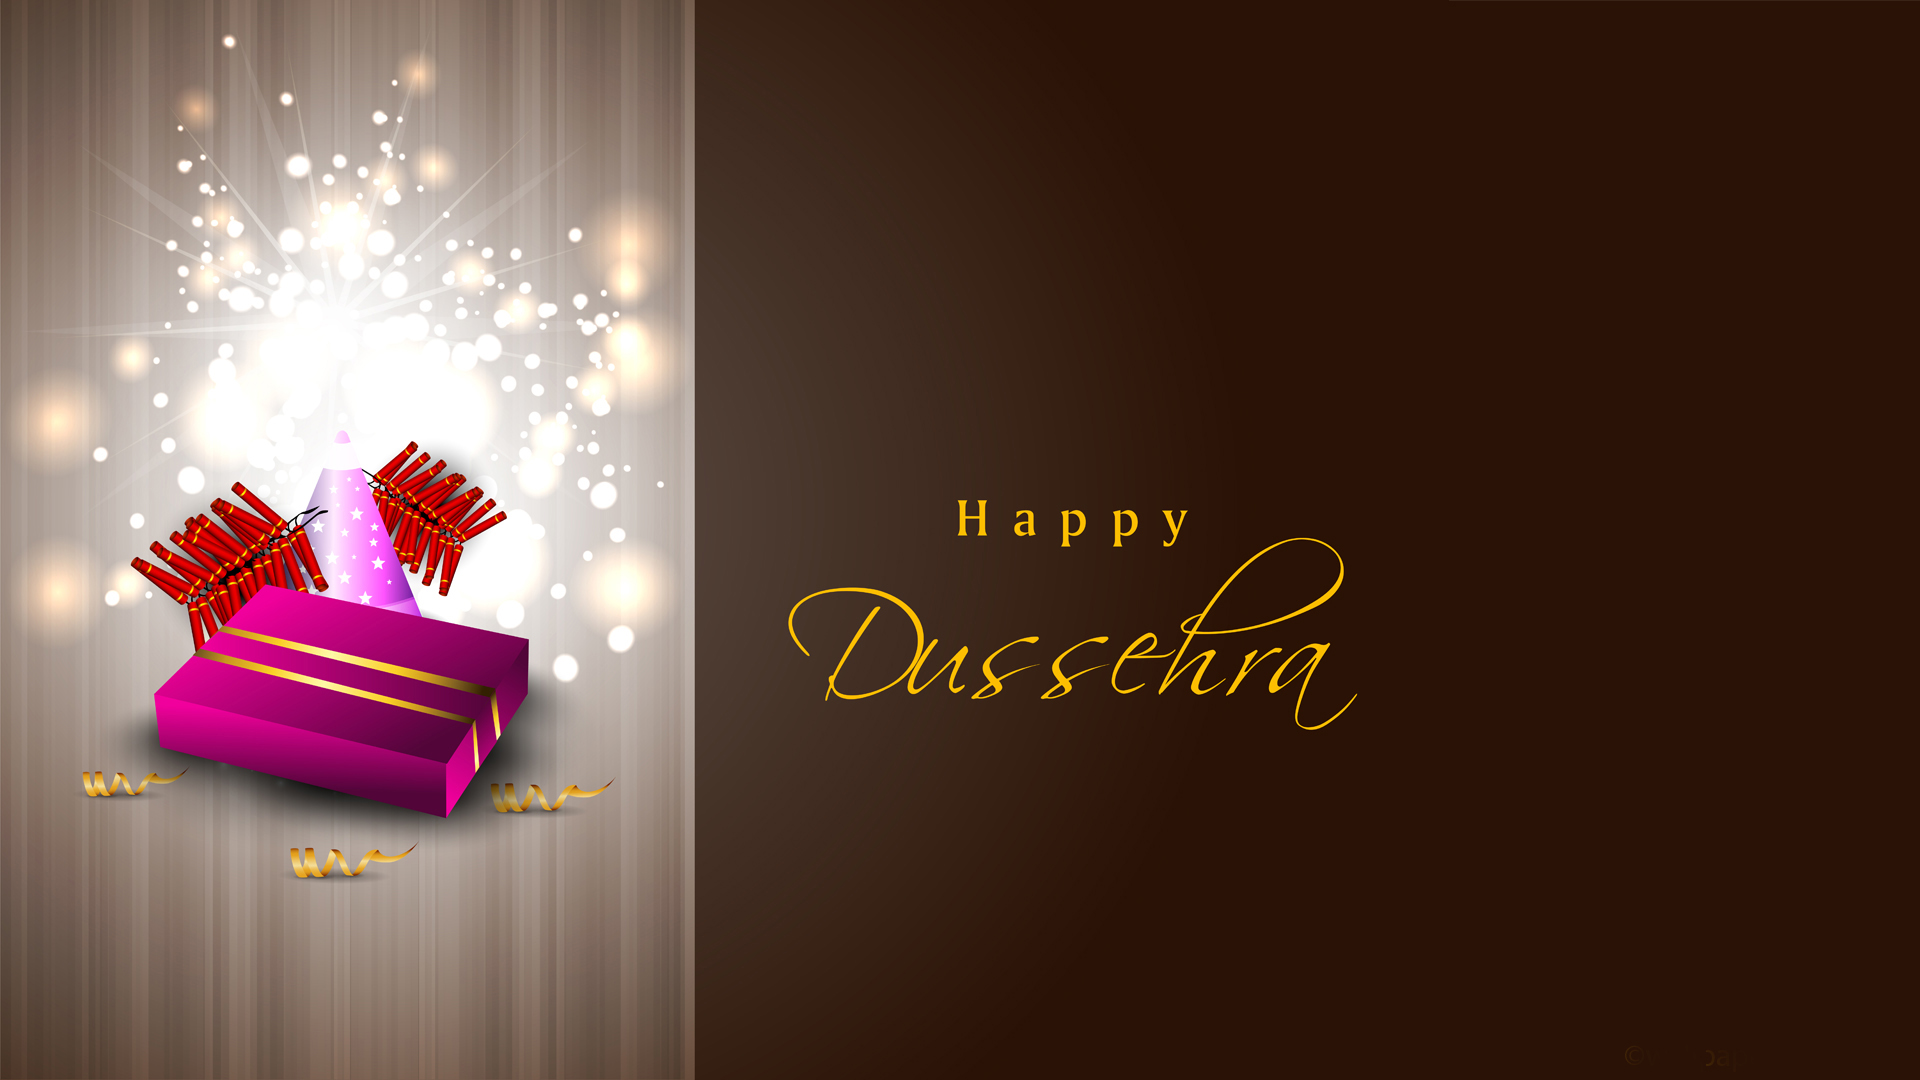 Dussehra Wallpapers Images Pictures For Desktop - Happy Dussehra Images Download - HD Wallpaper 